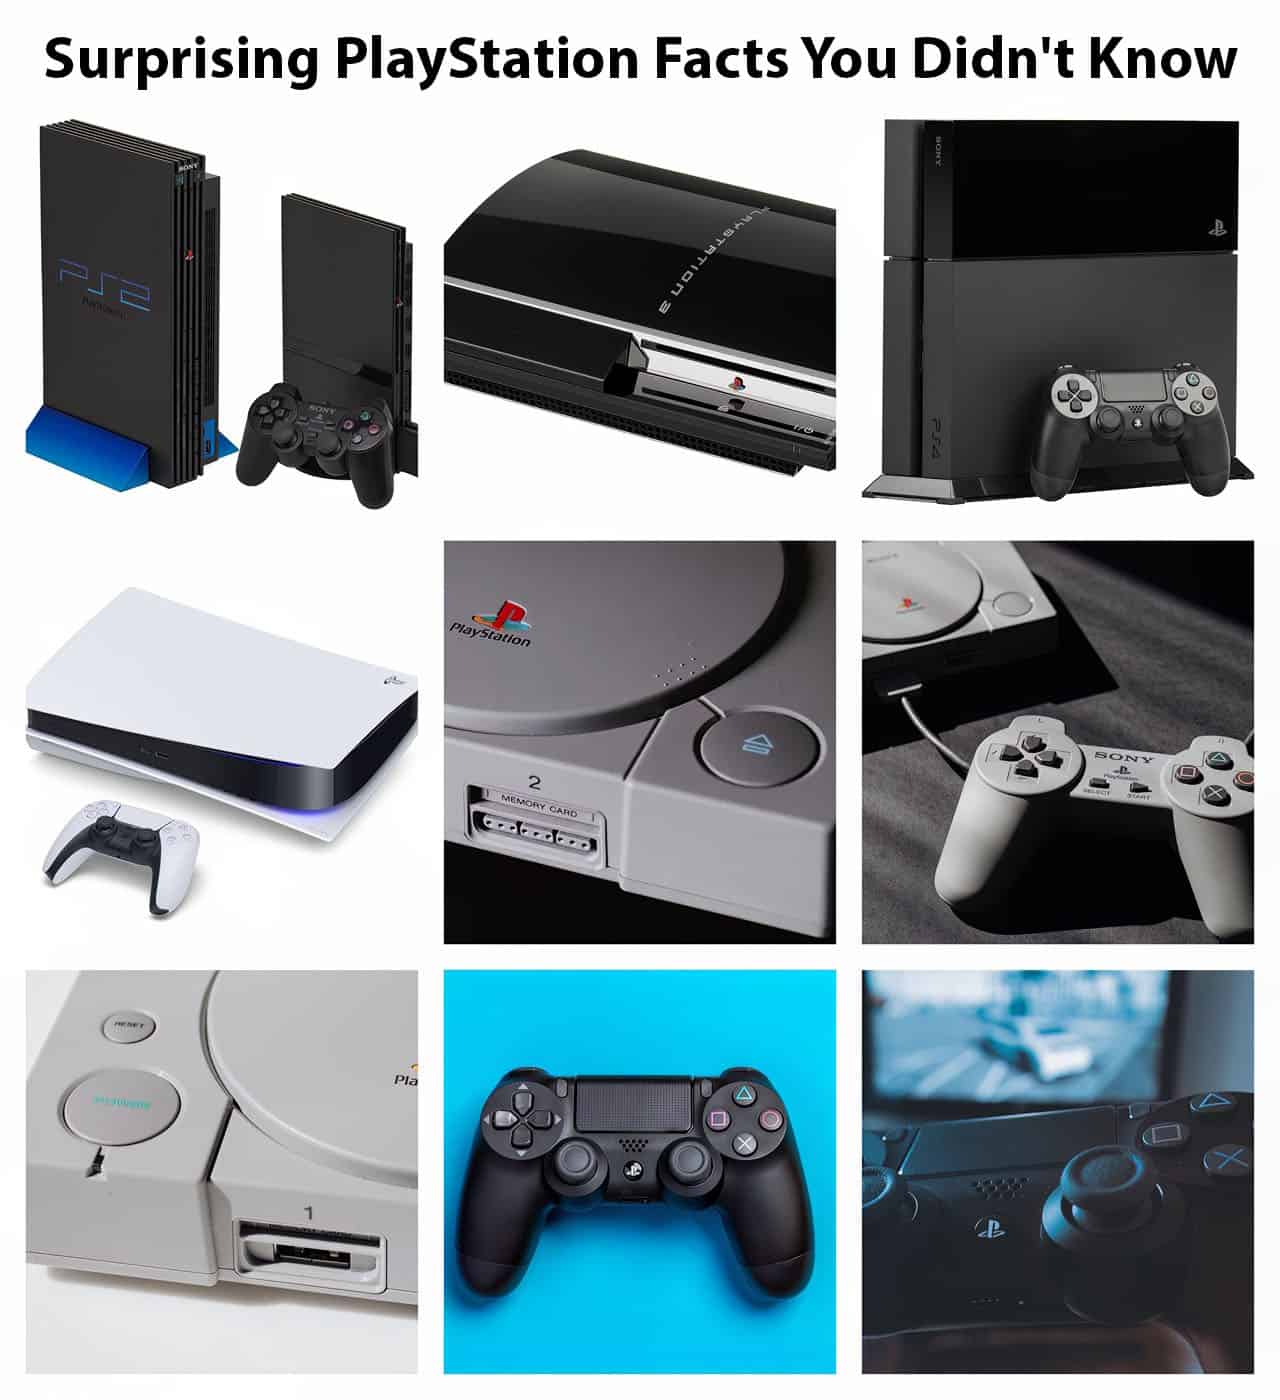 20 Fascinating PlayStation Facts You Didn't Know